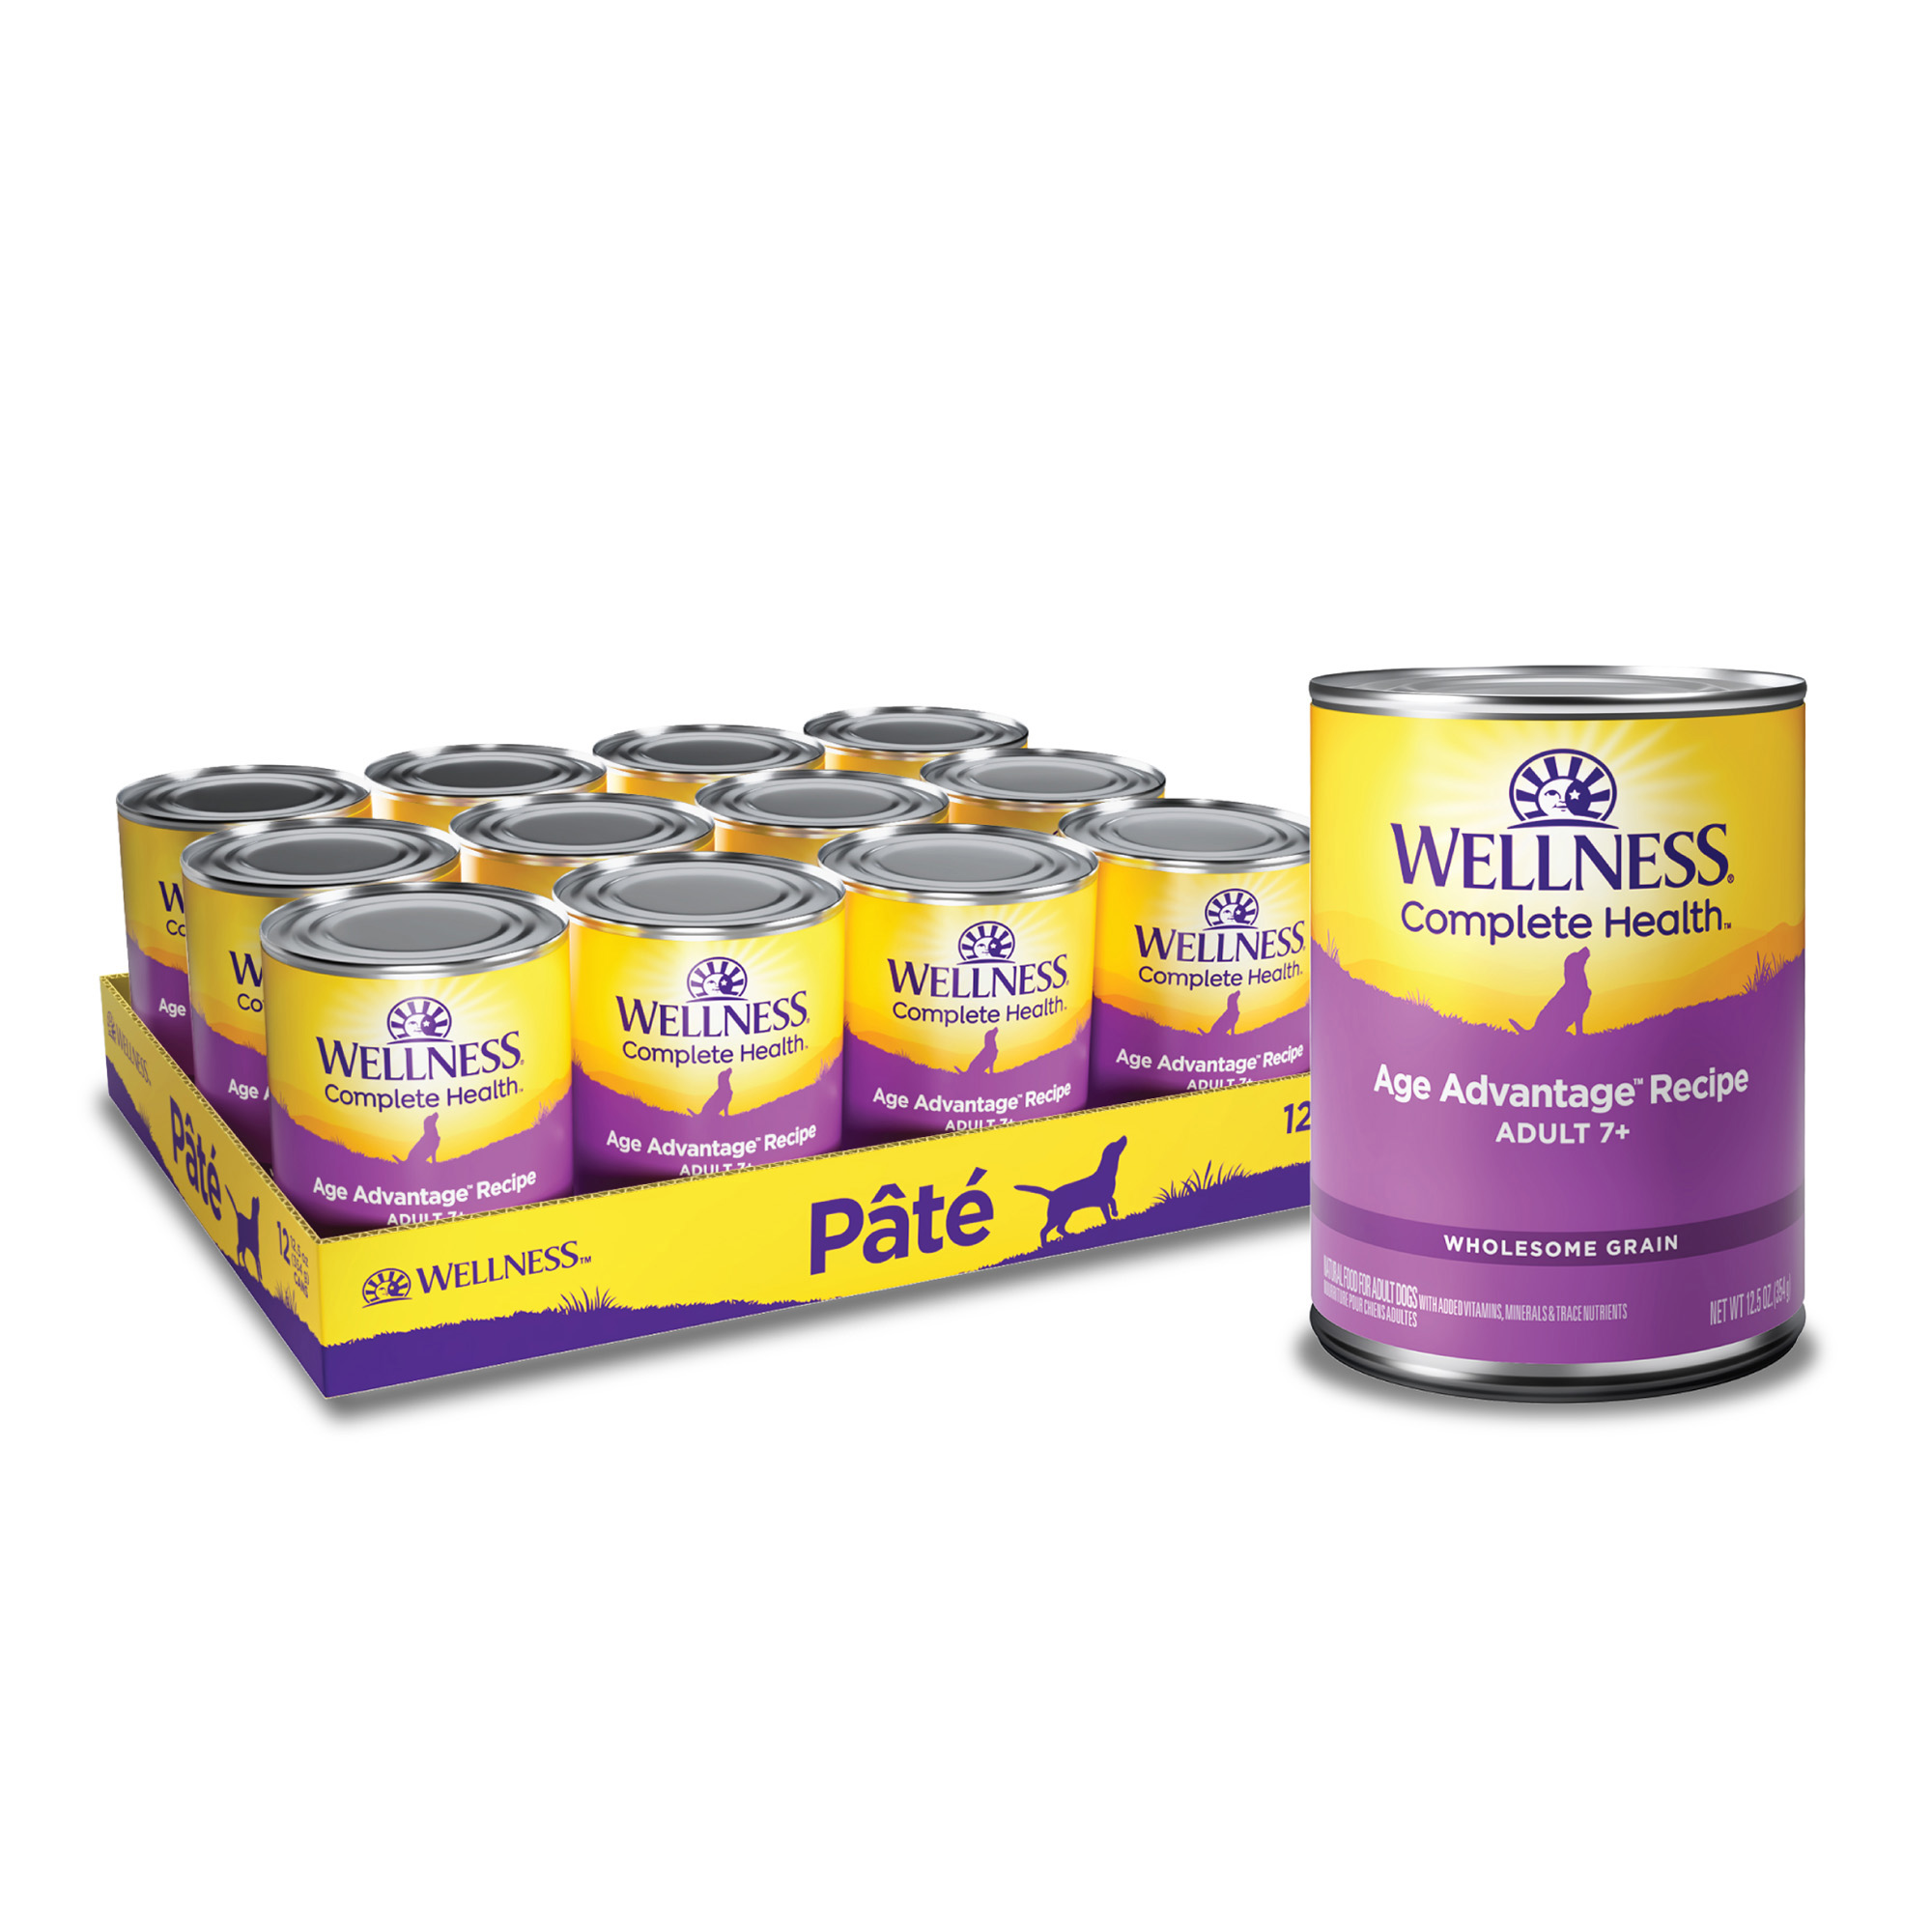 Wellness Complete Health Natural Wet Canned Dog Food, Senior Chicken & Sweet Potato, 12.5-Ounce Can (Pack of 12) - image 1 of 7